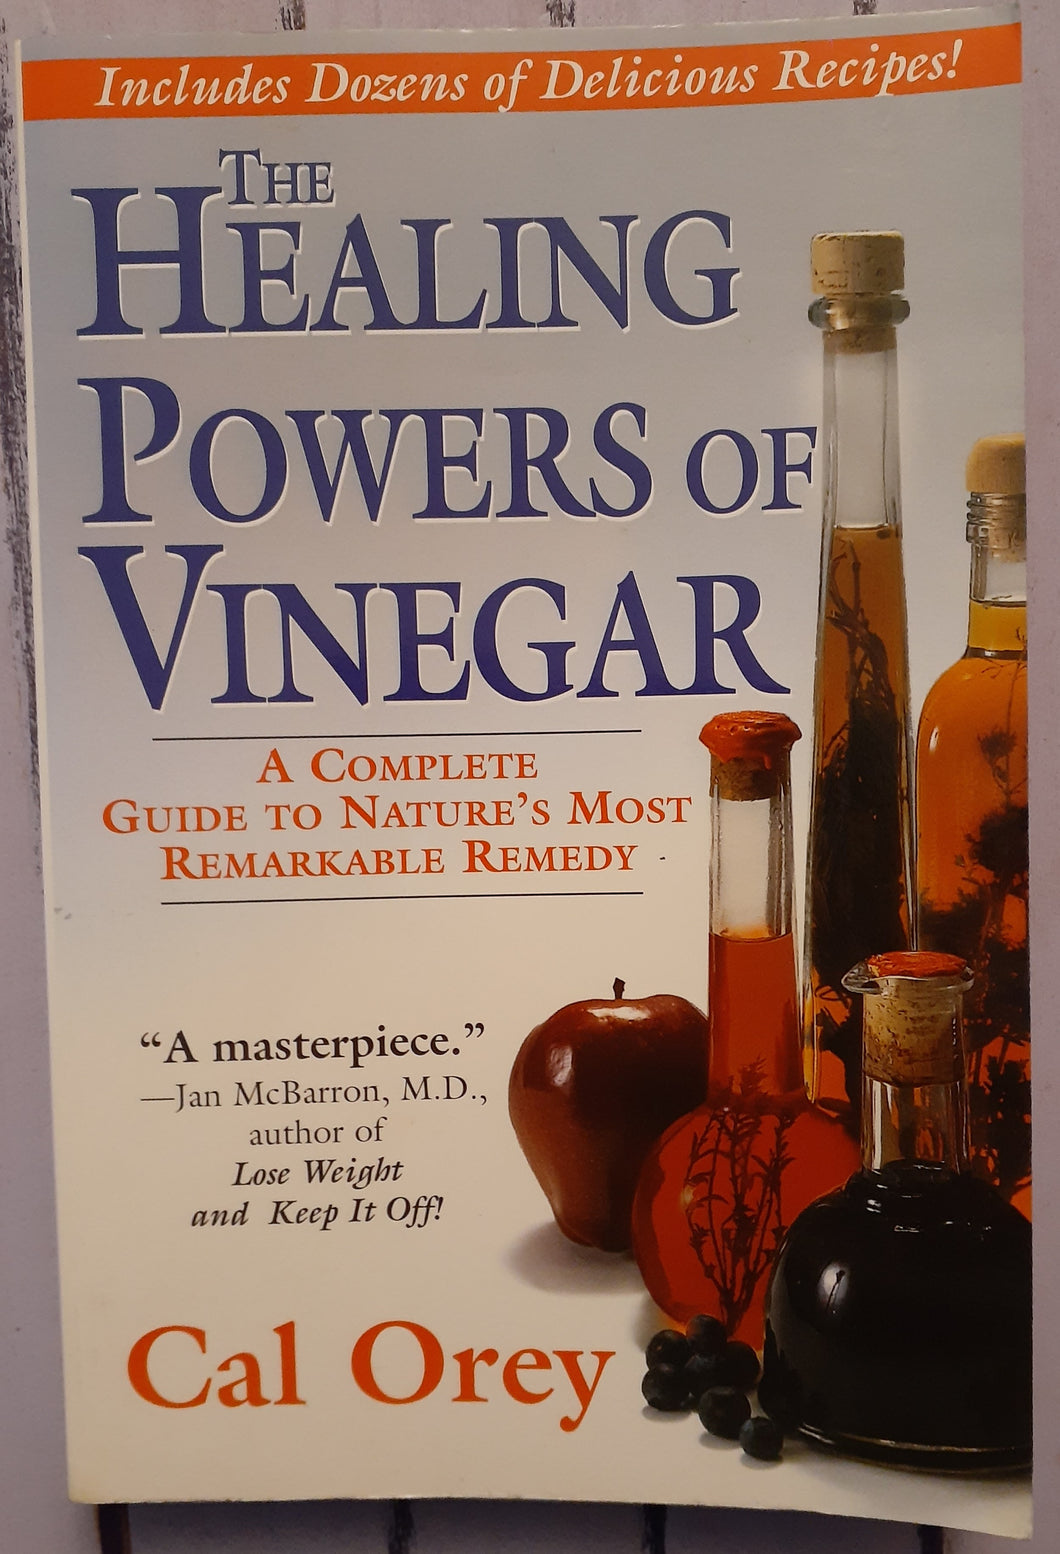 The Healing Power of Vinegar: A Complete Guide to Nature's Most Remarkable Remedy